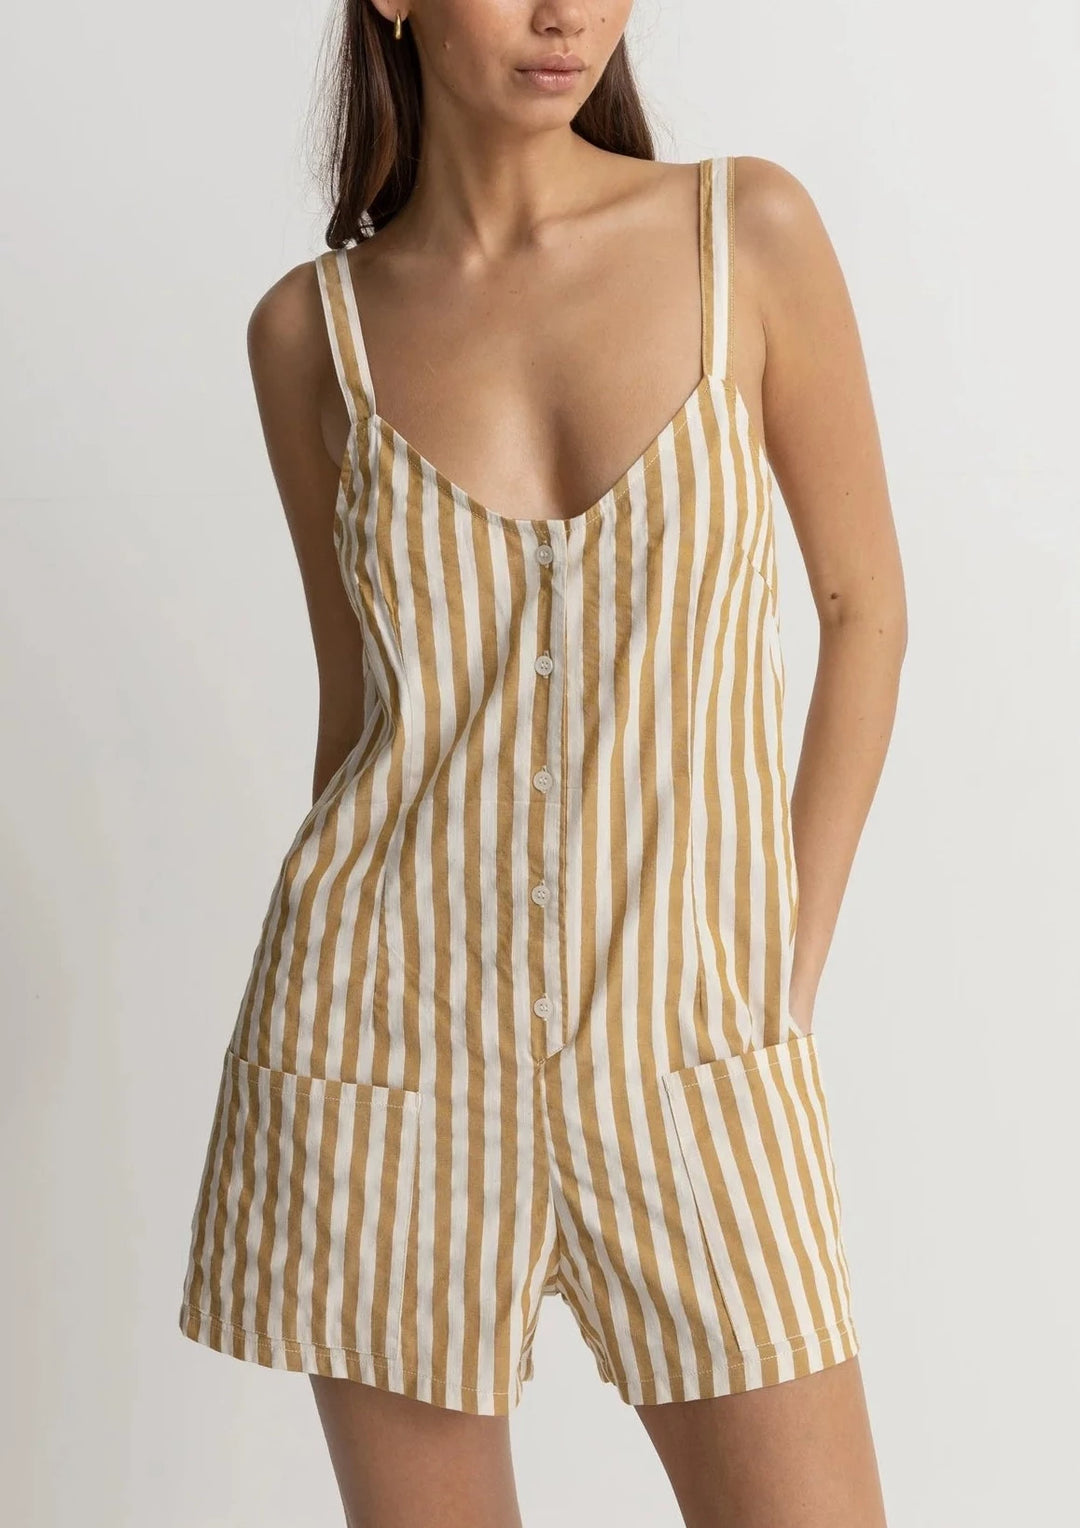 Goodtimes Striped Playsuit